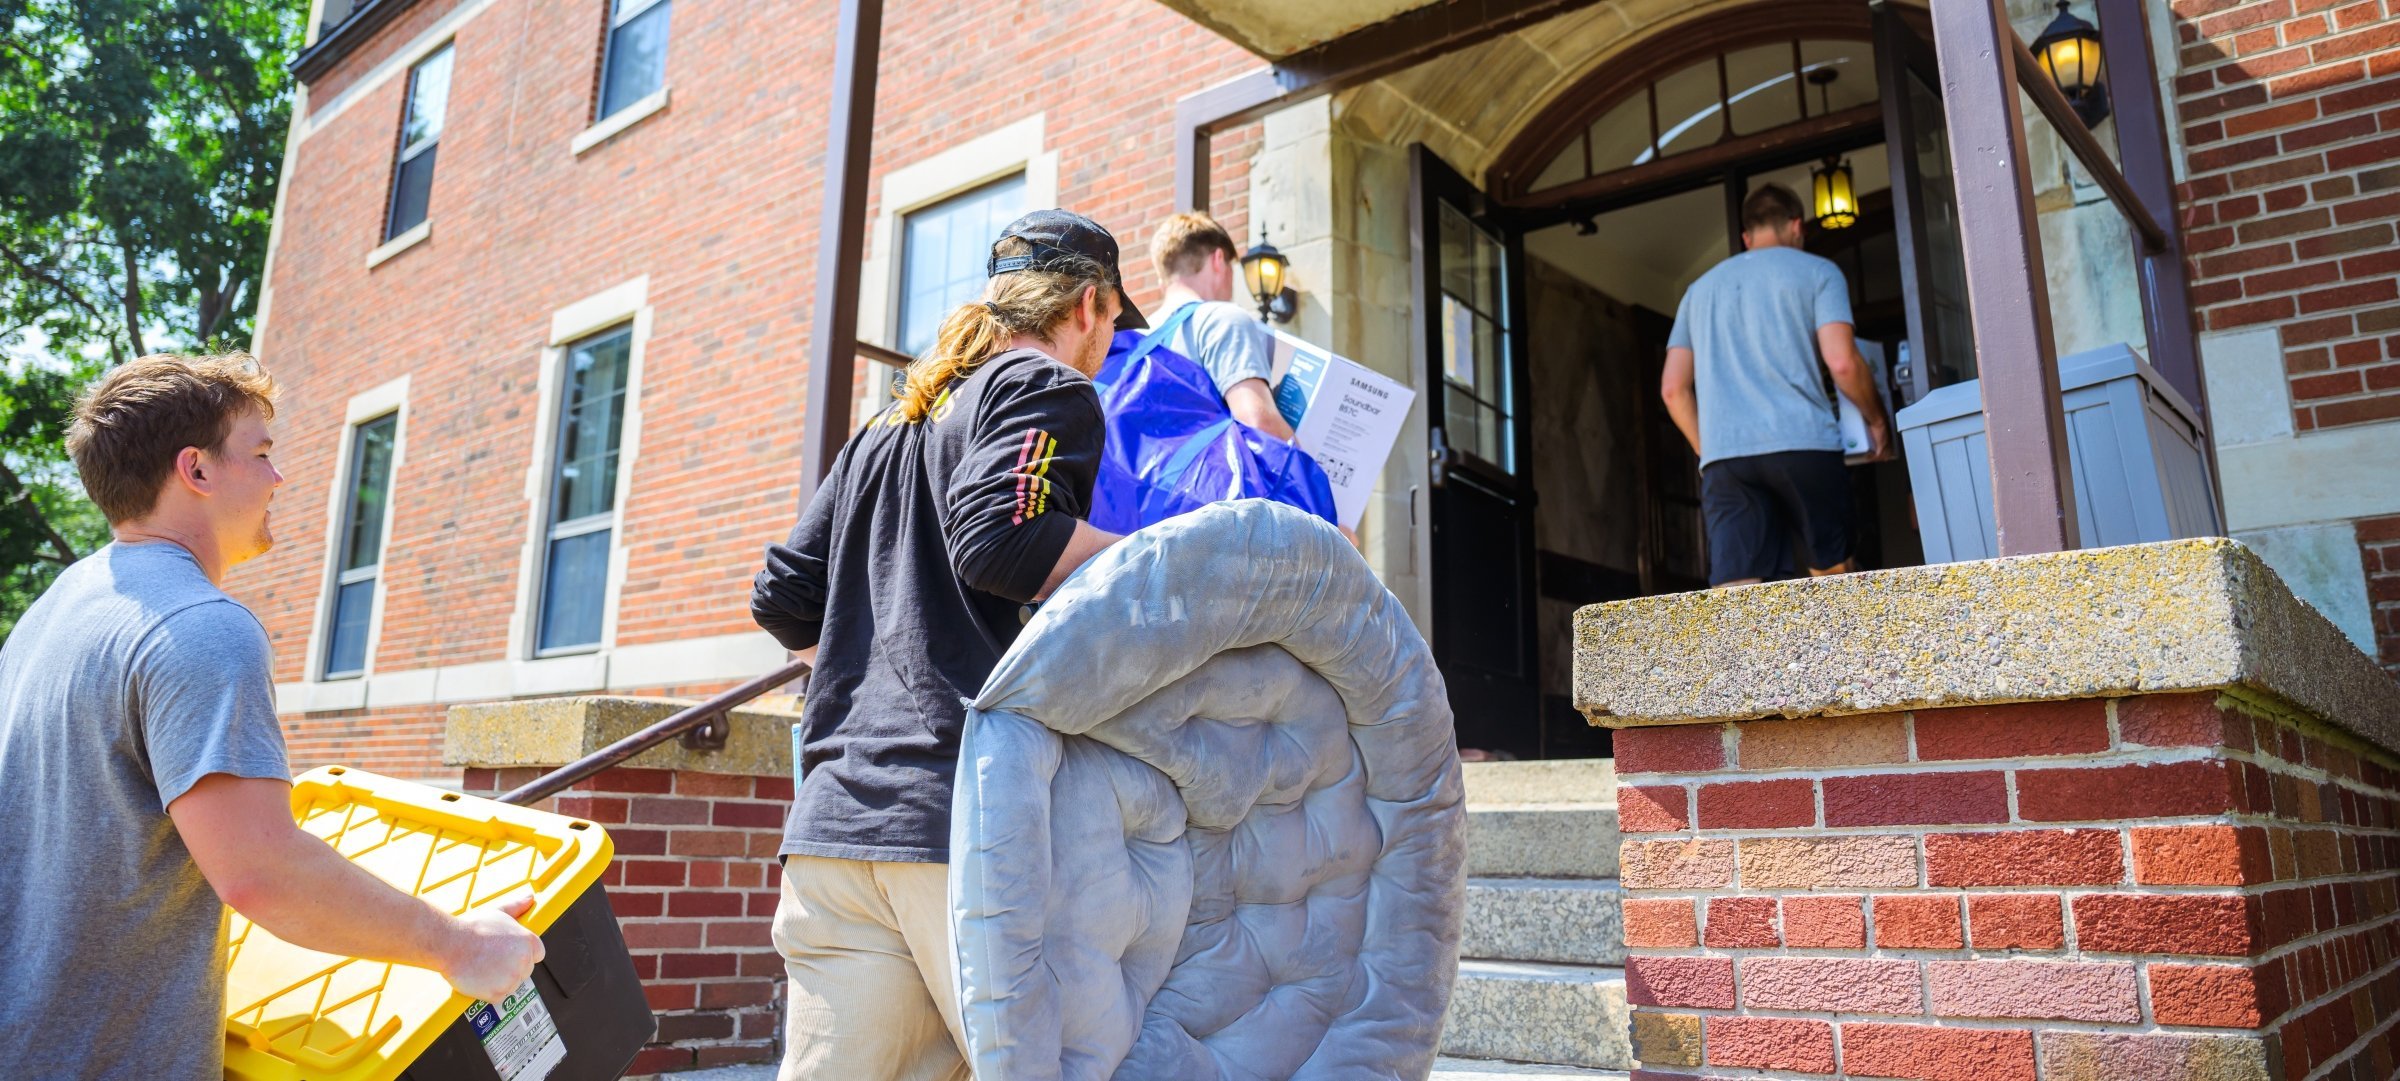 Students carry items into their residence hall